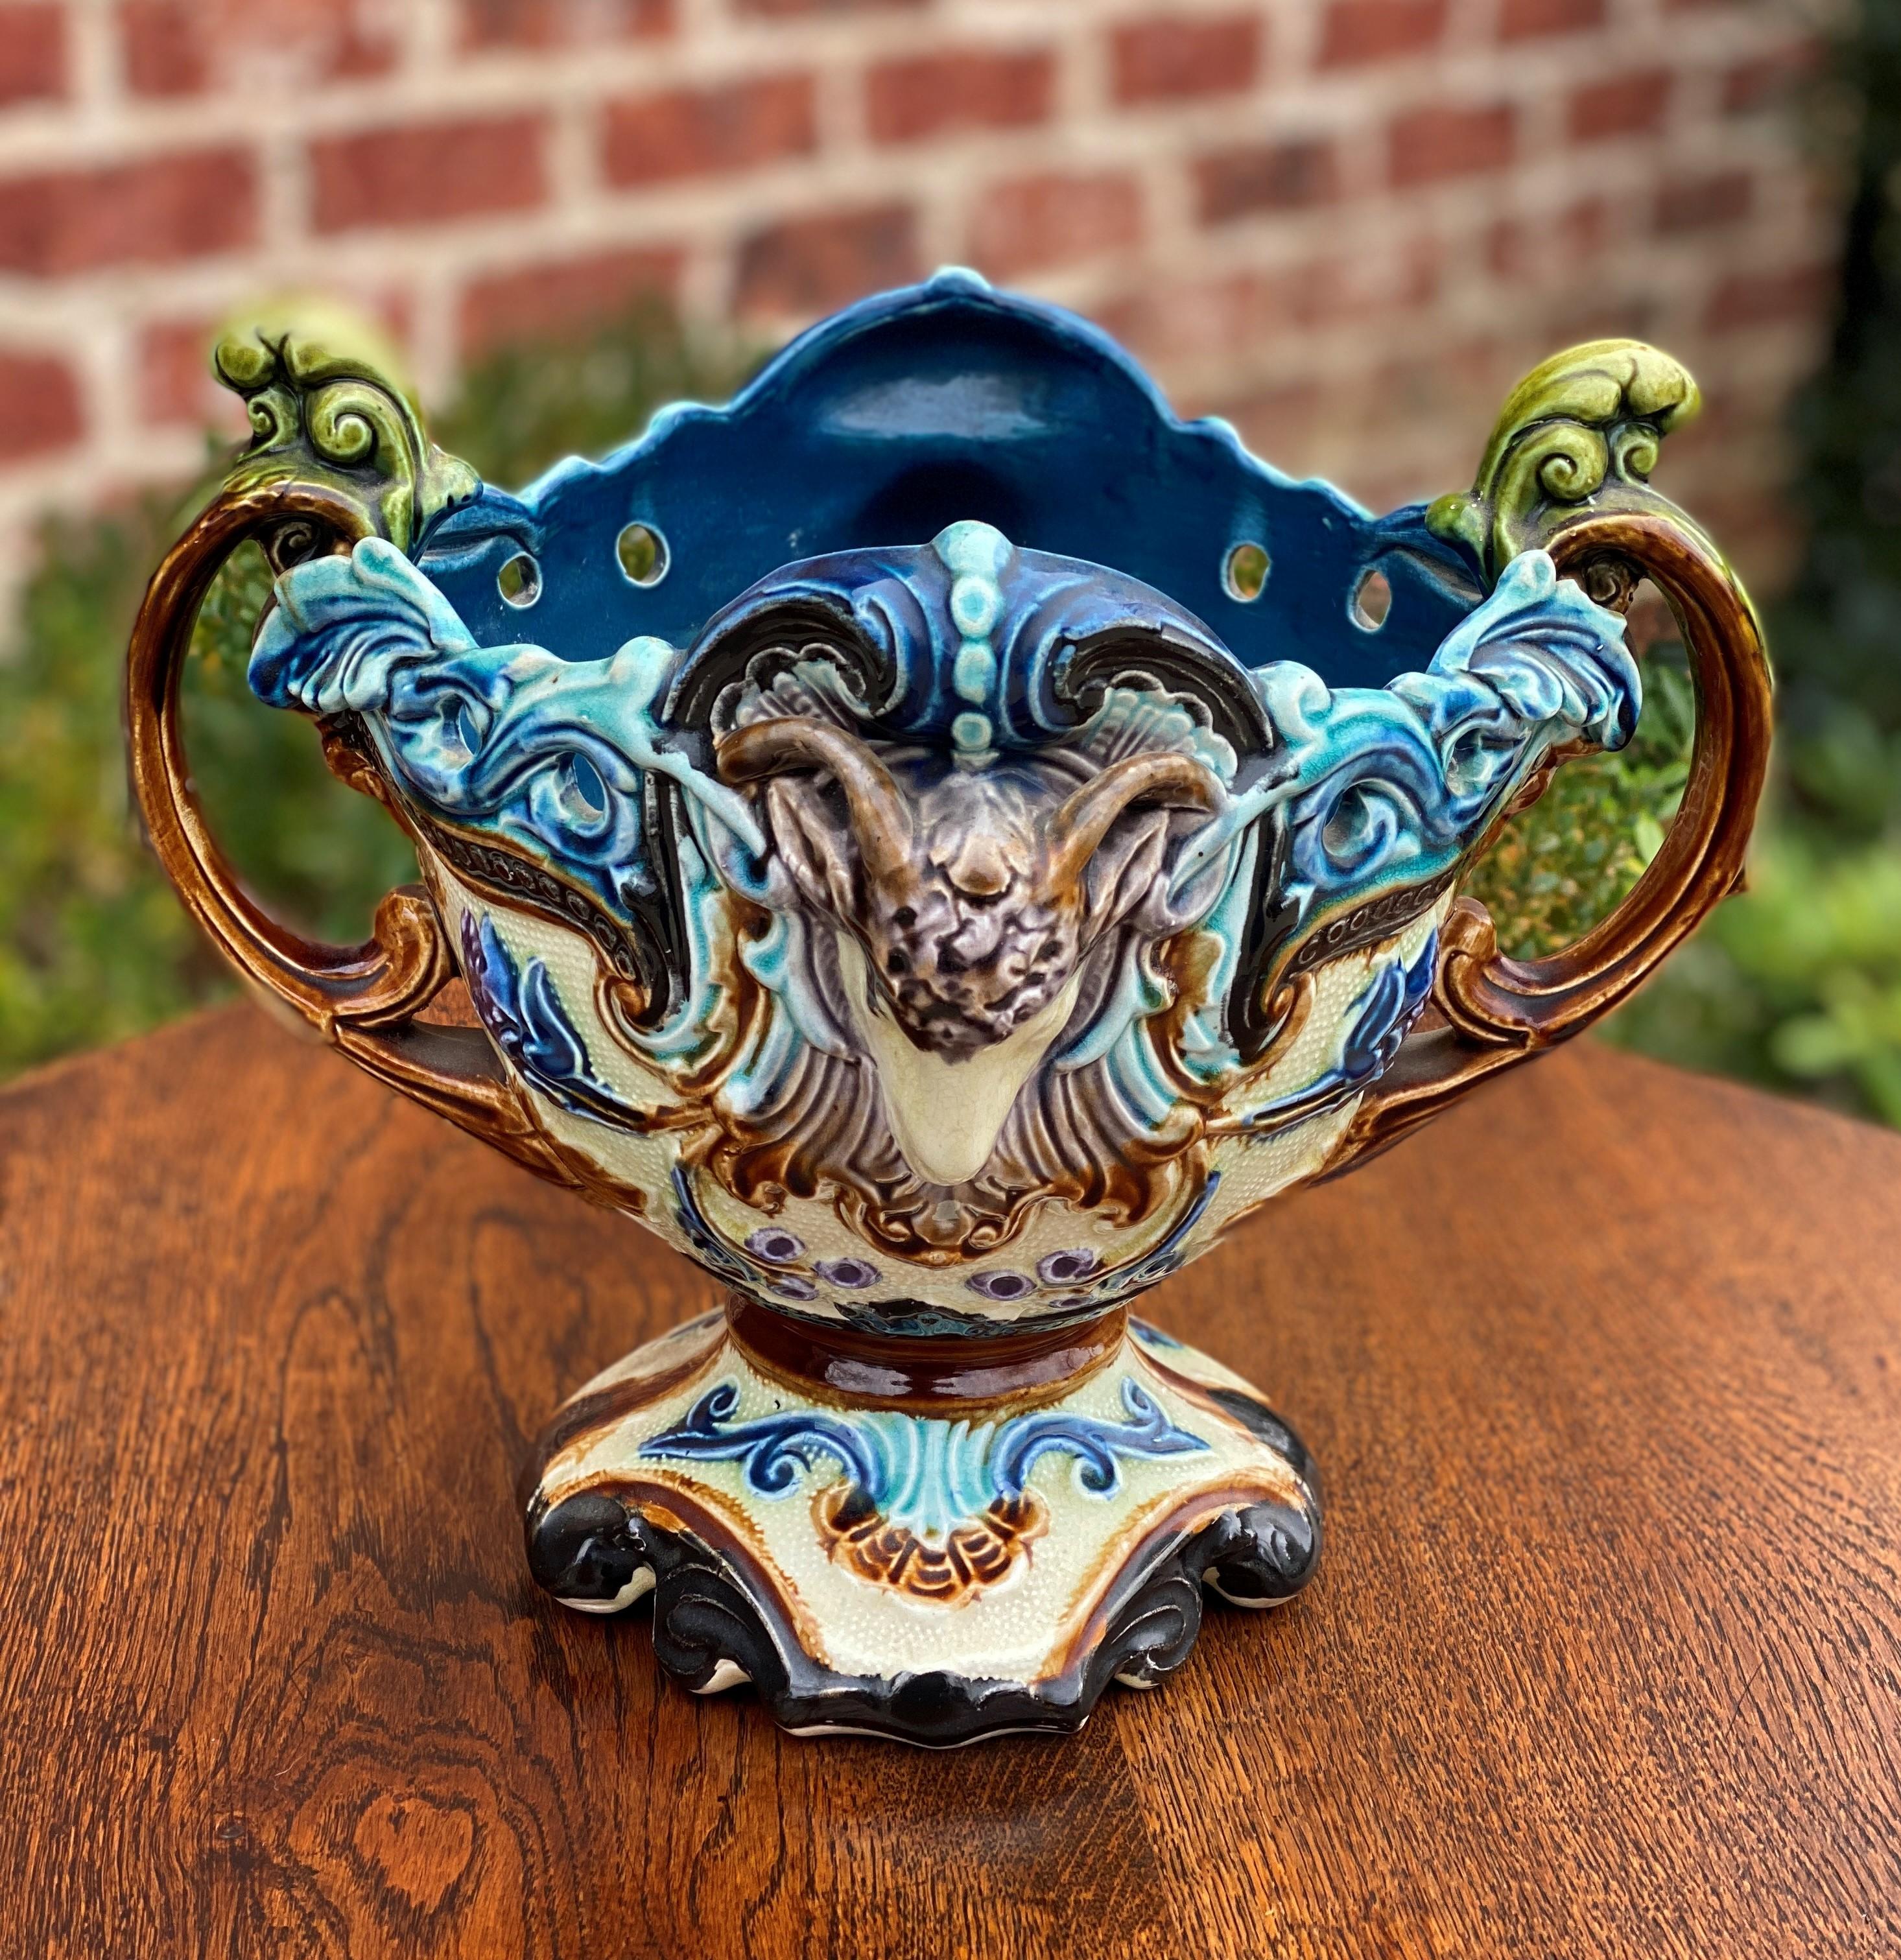 Fired Antique French Majolica Cache Pot Planter Flower Pot Jardiniere Vase c1900 Rams